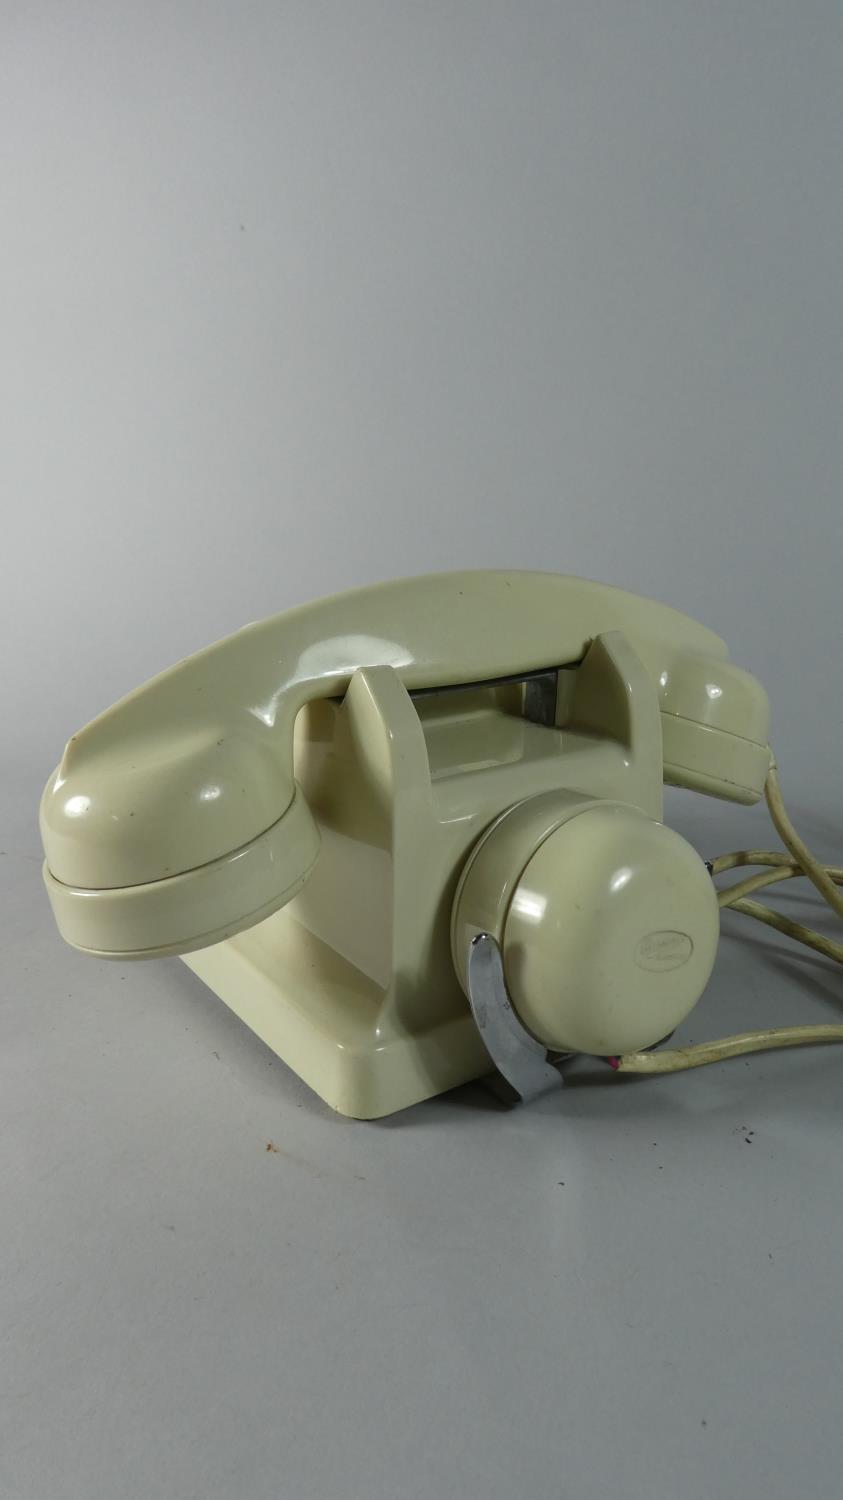 A Vintage Ericsson Ivory Bakelite Telephone with Extra Listening Ear Piece Mounted at Rear - Image 3 of 3